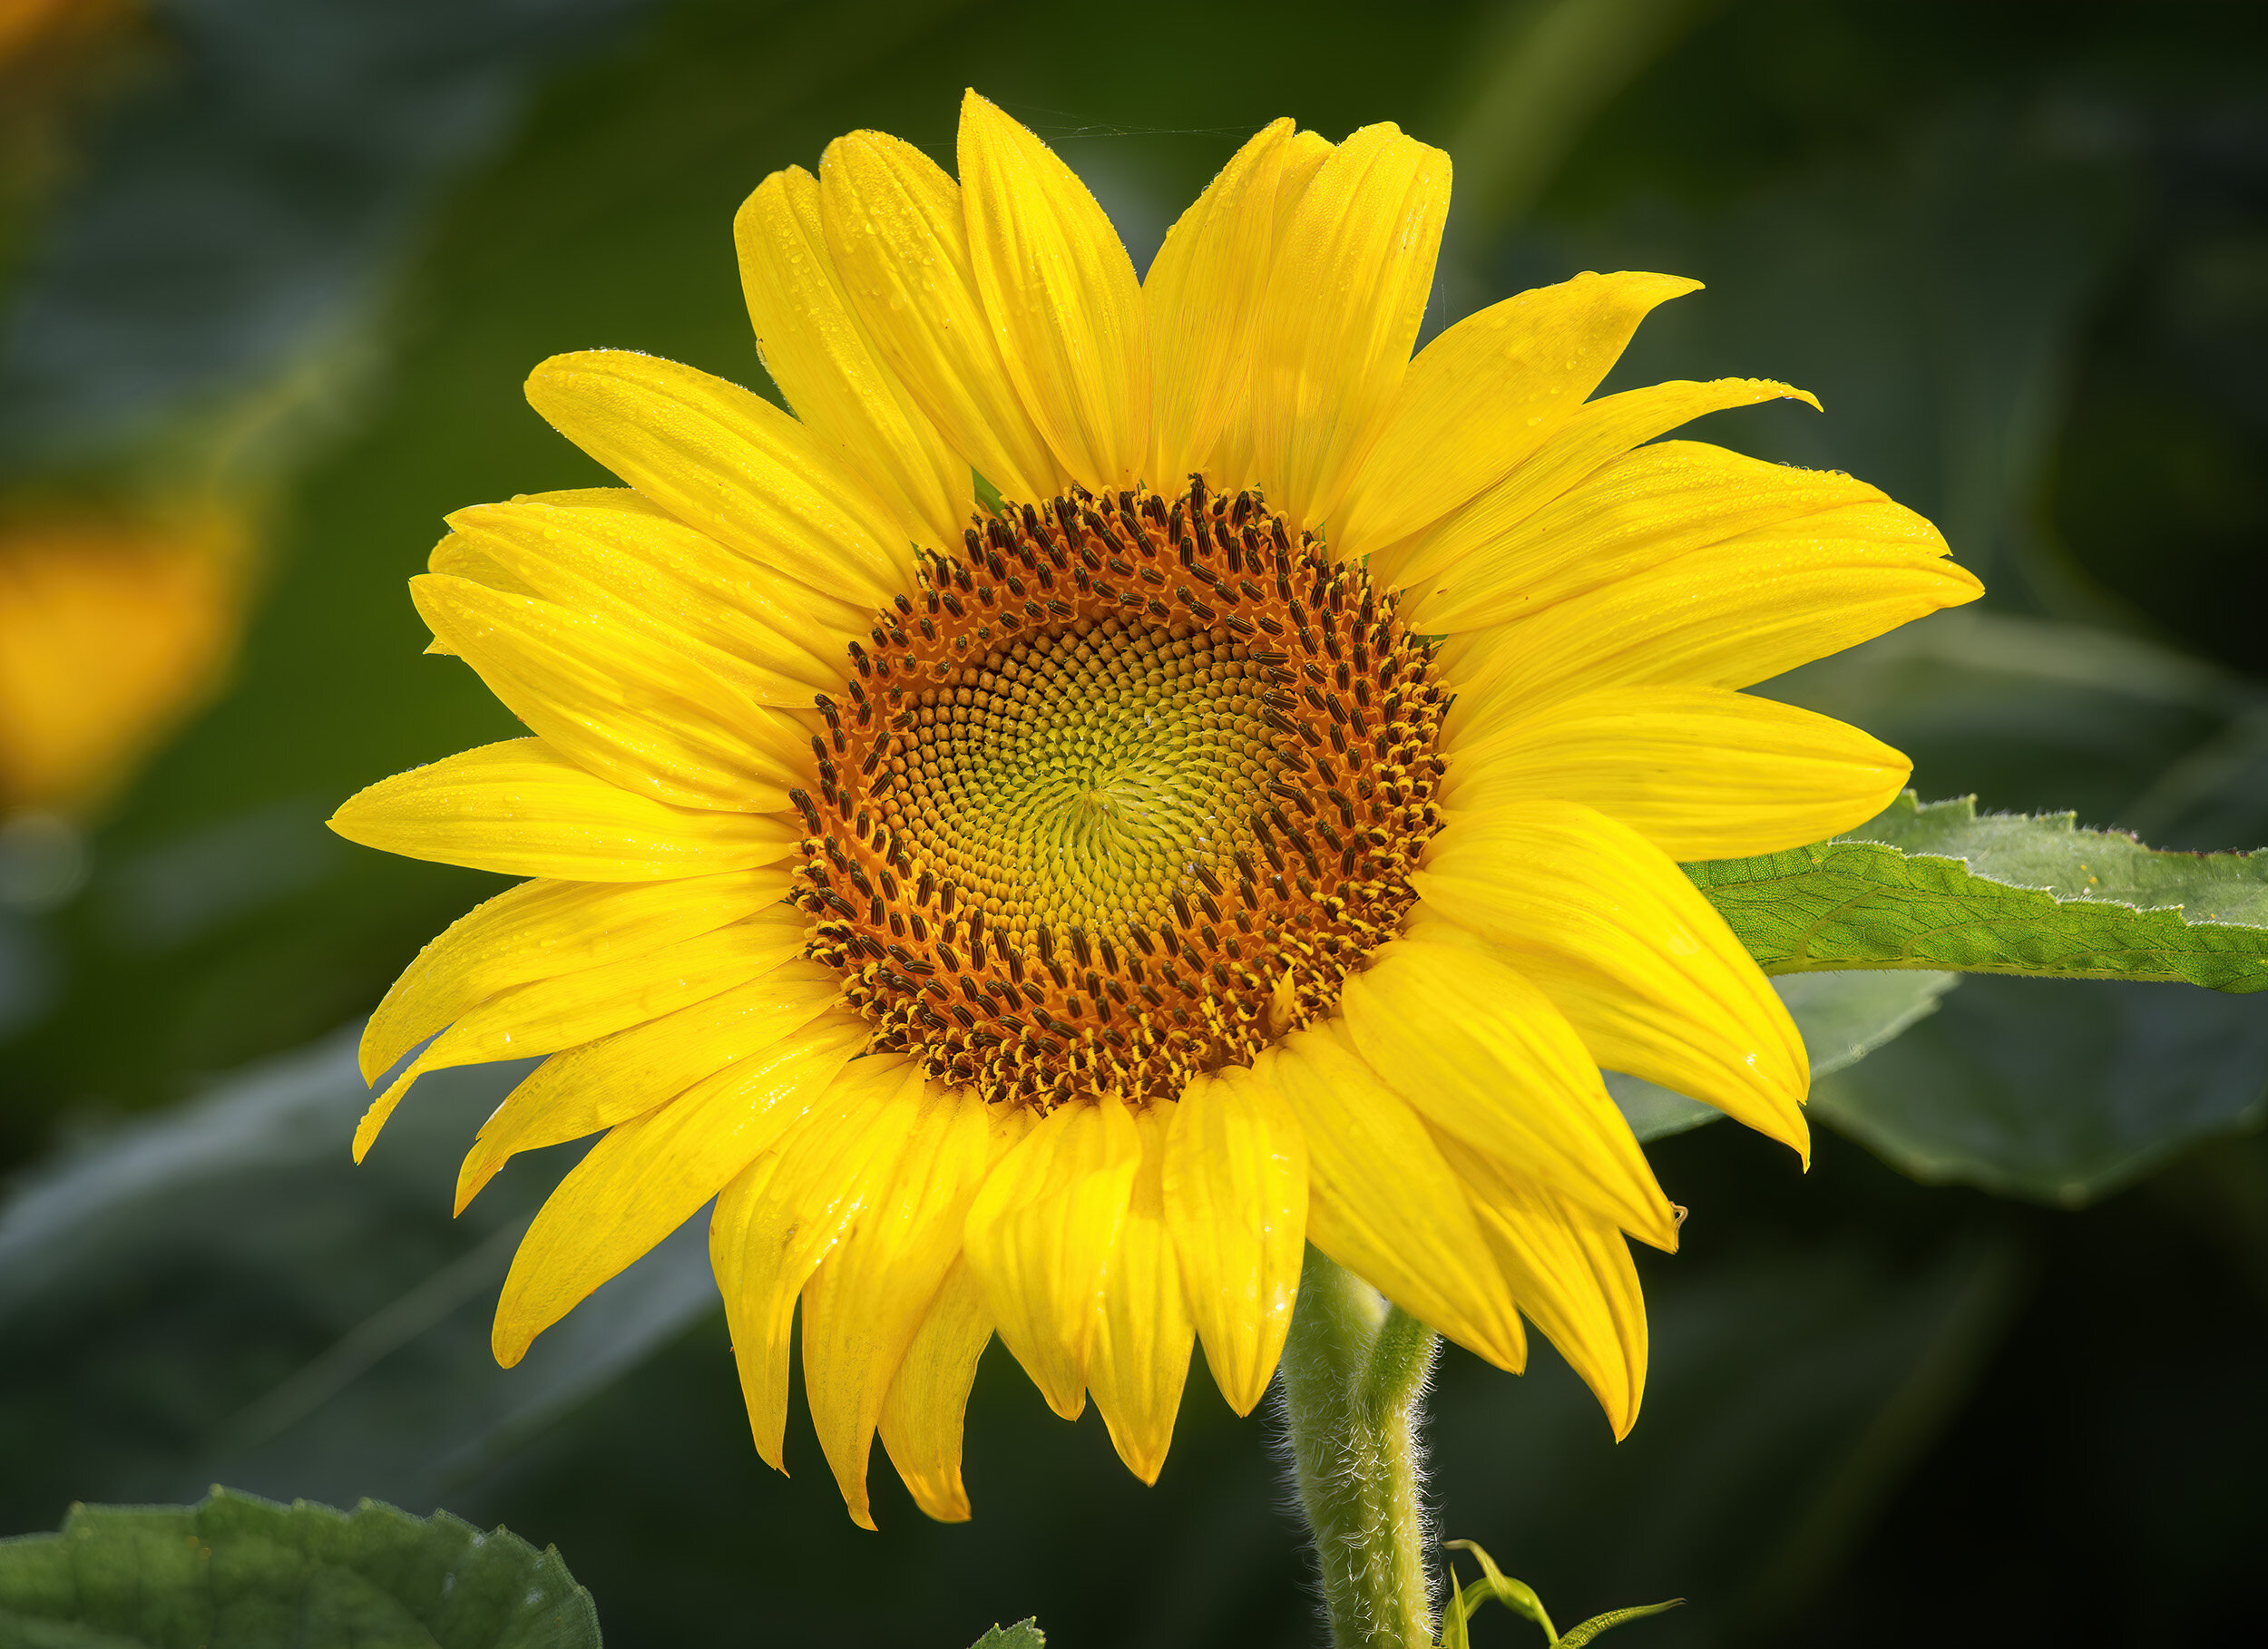 A Sunflower at McKee Beshers WMA